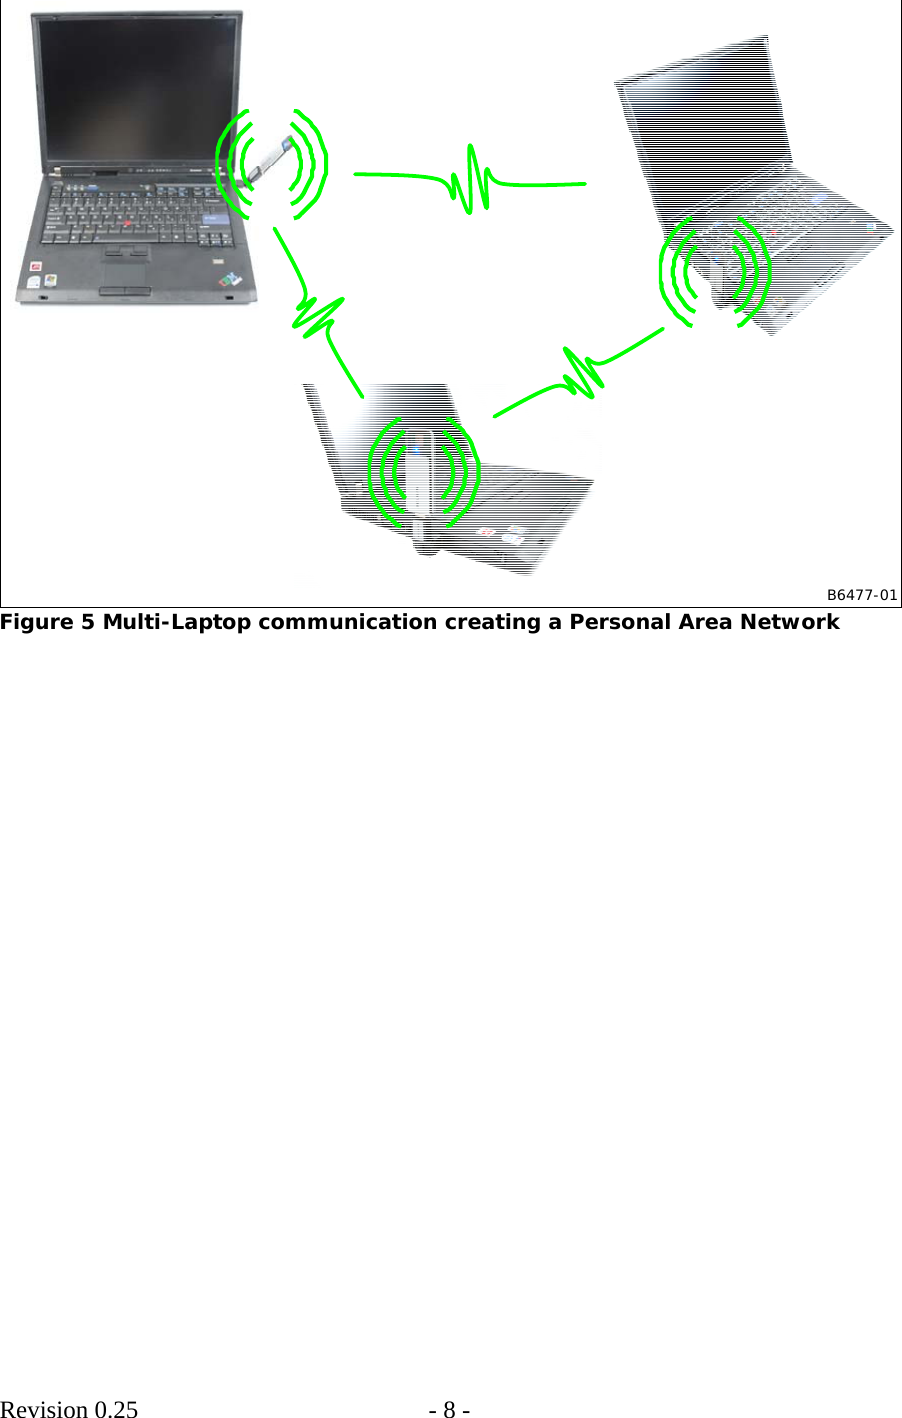        Revision 0.25  - 8 -     B6477-01  Figure 5 Multi-Laptop communication creating a Personal Area Network 